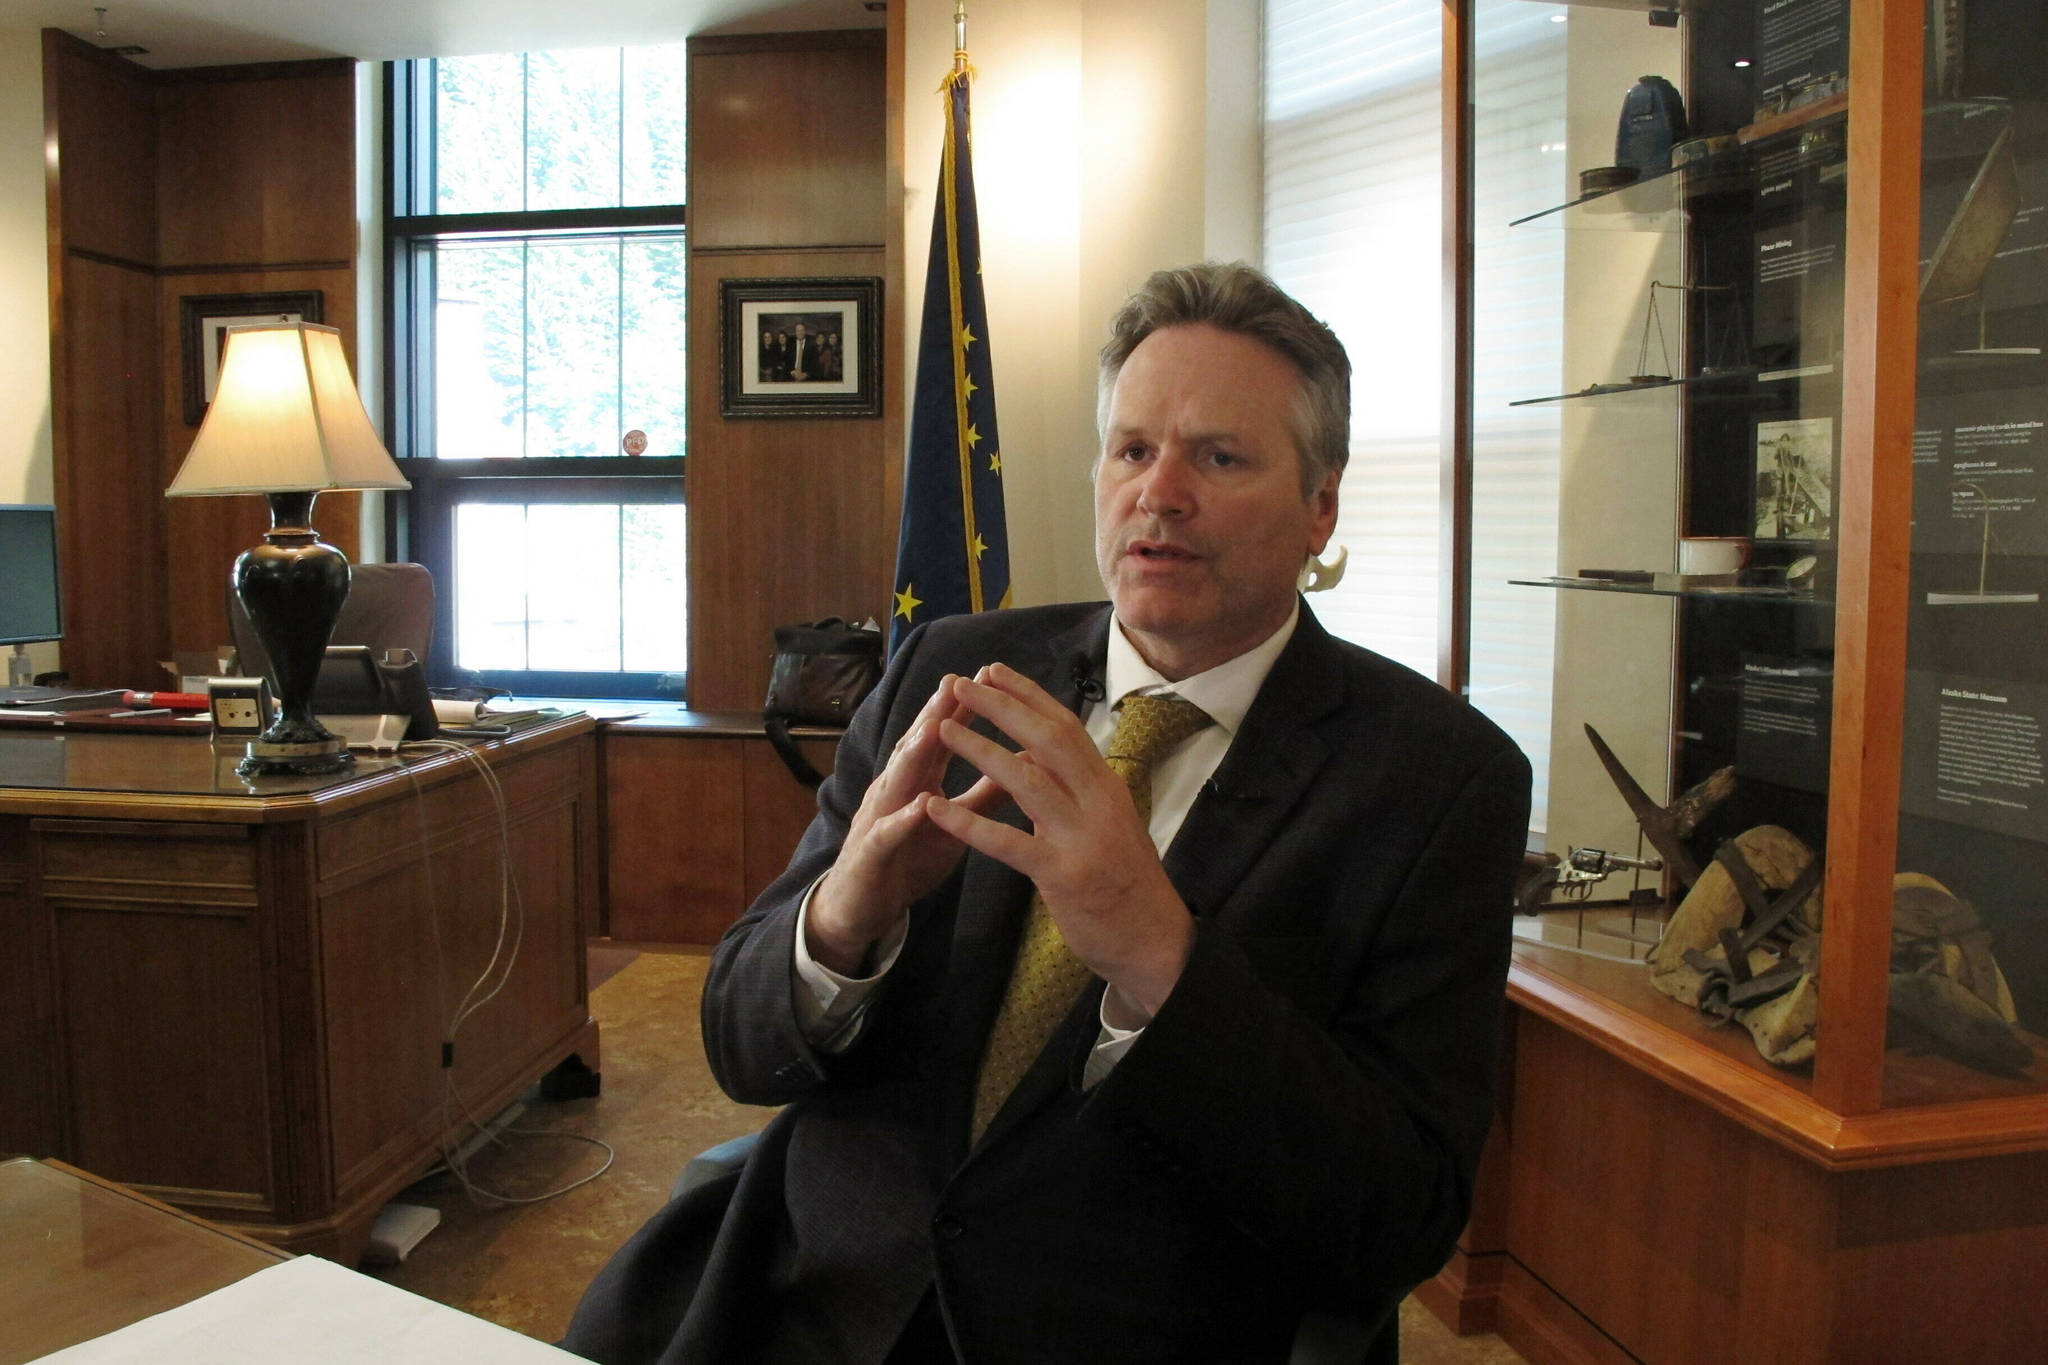 Alaska Gov. Mike Dunleavy speaks to reporters in his office at the state Capitol on Wednesday, May 29, 2019, in Juneau, Alaska. Dunleavy says he’s hopeful the Legislature will pass a budget next week but says his administration is preparing in case that doesn’t happen. (AP Photo/Becky Bohrer)